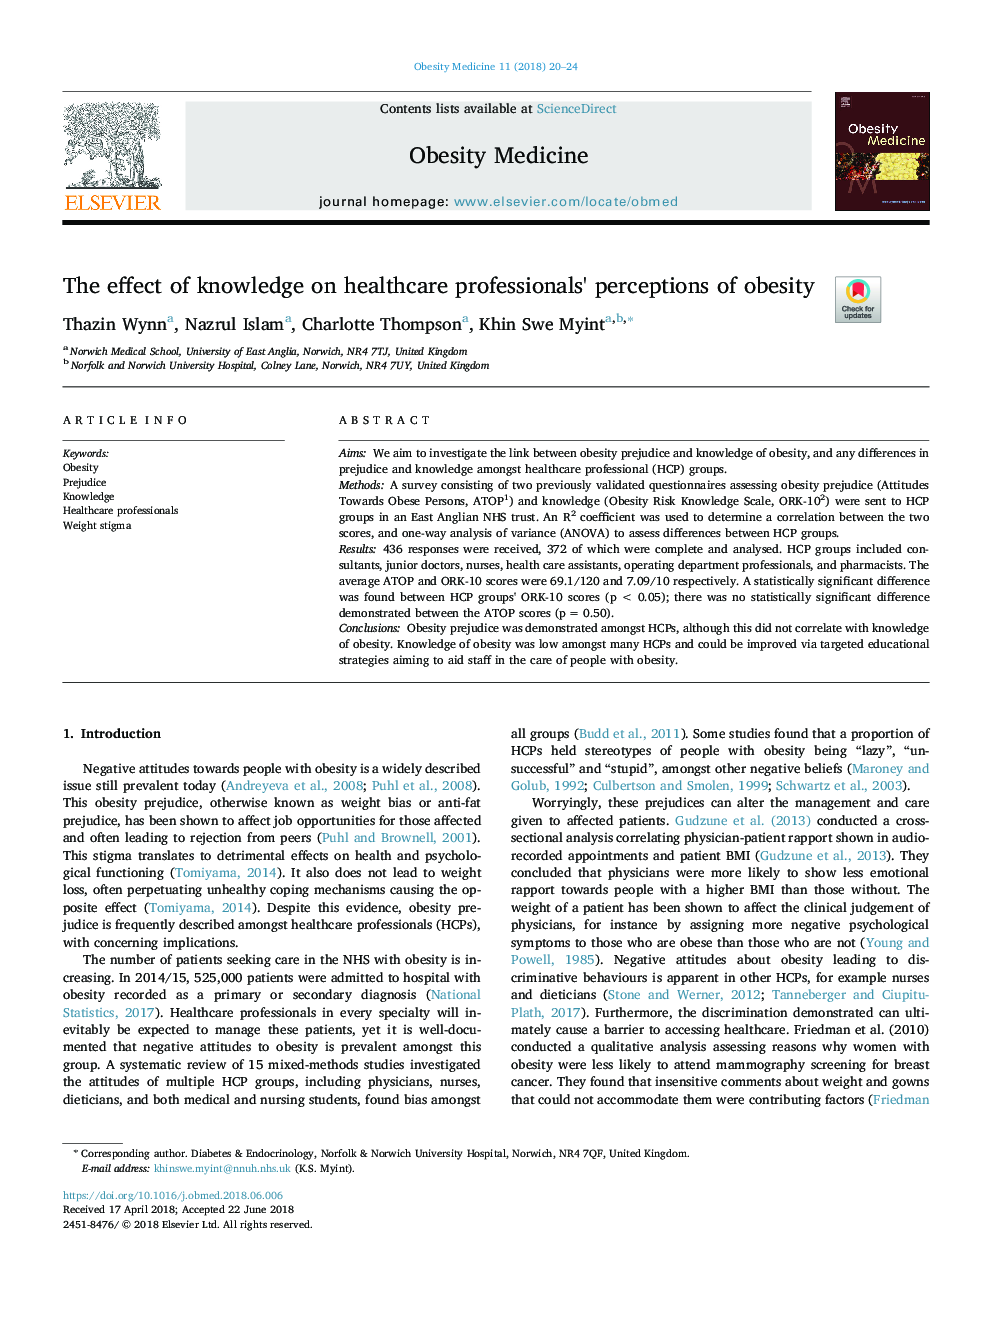 The effect of knowledge on healthcare professionals' perceptions of obesity